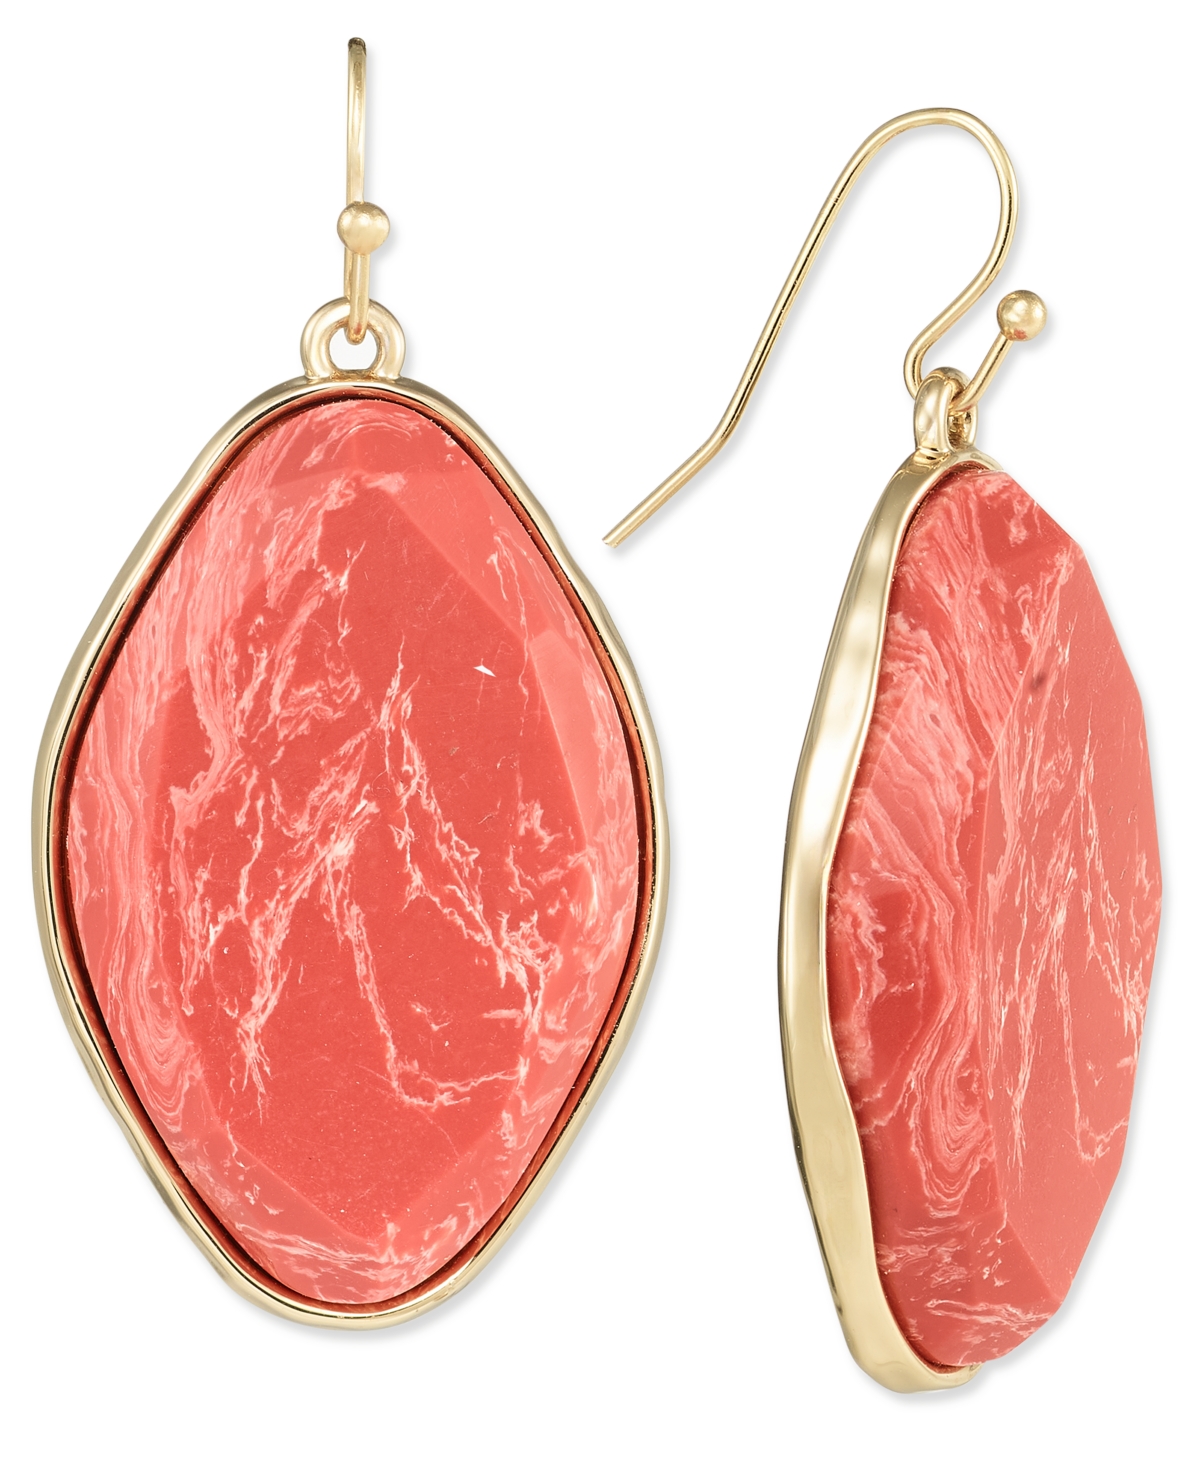 Gold-Tone Oval Color Stone Drop Earrings, Created for Macy's - Coral